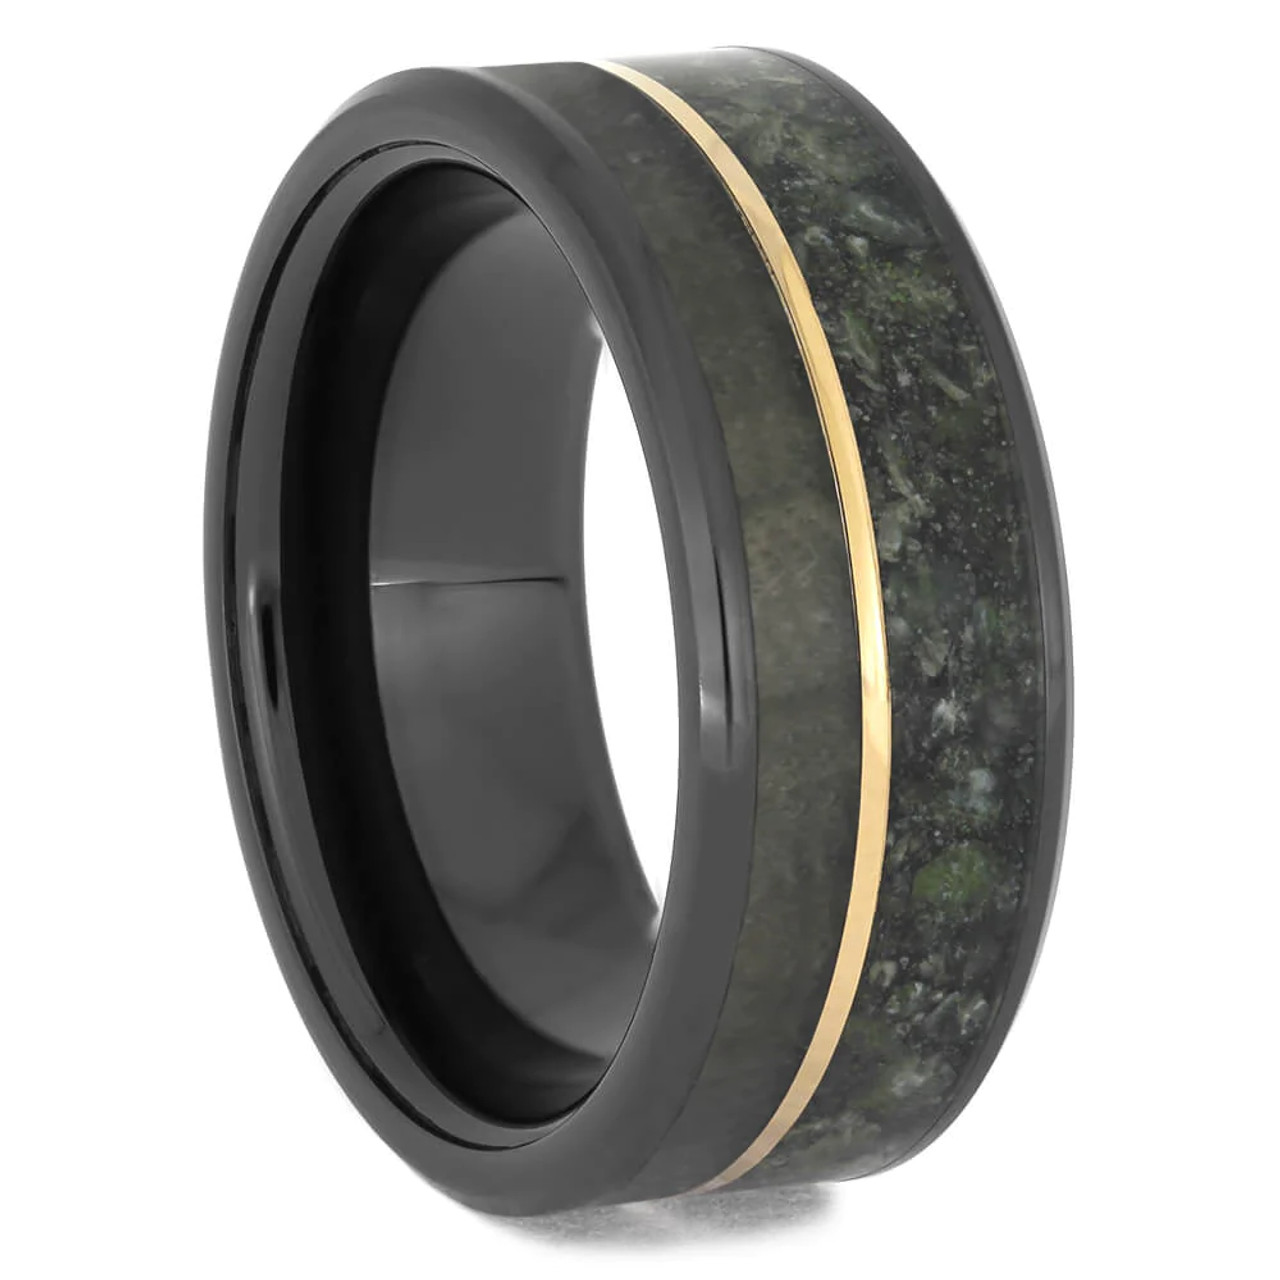 Obsidian Noble Black Onyx Superior Ring Wedding Accessories Men's